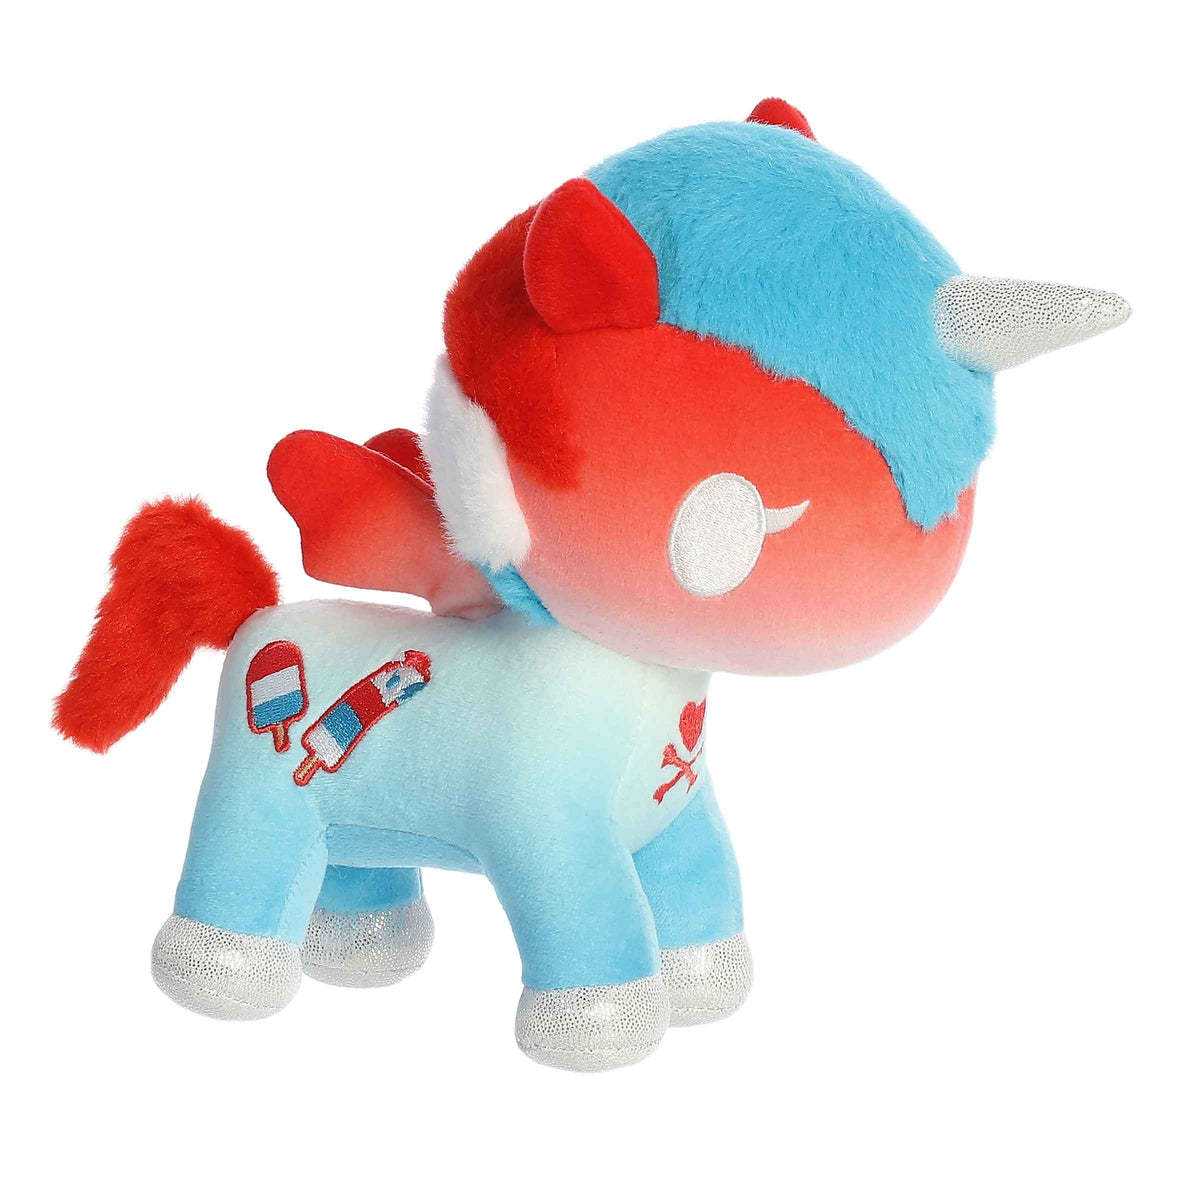 Summer-Cicle Unicorno plush from tokidoki by Aurora, blue with red and white unicorn mane, popsicle-inspired, cheerful